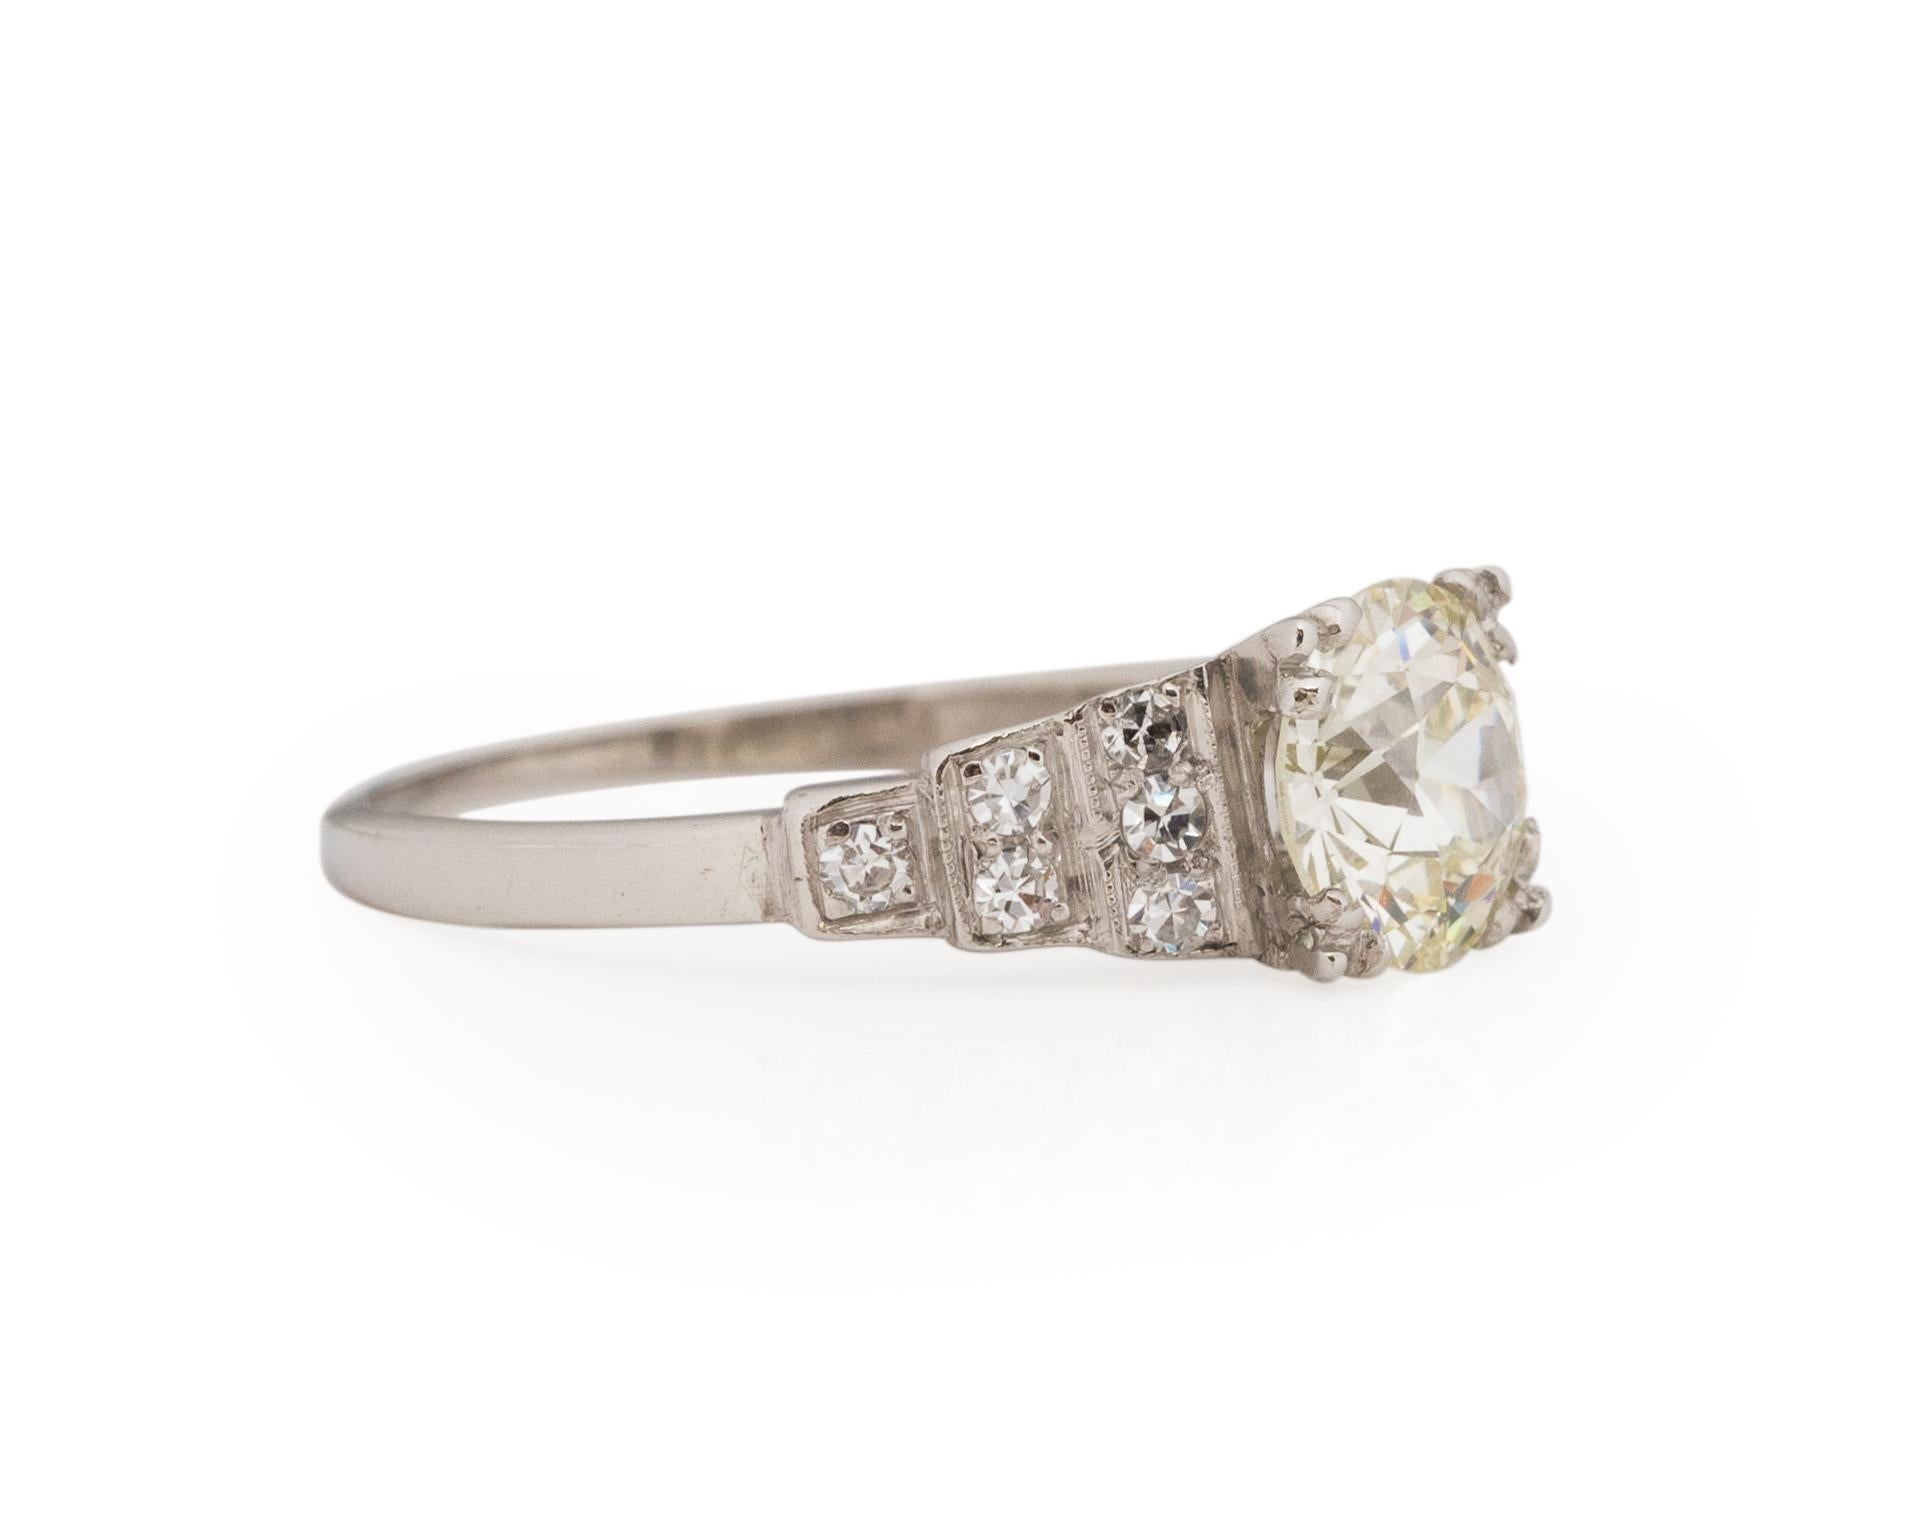 Ring Size: 5.25
Metal Type: Platinum [Hallmarked, and Tested]
Weight: 2.5 grams

Center Diamond Details:
GIA REPORT #: 6223324327
Weight: .98ct
Cut: Old European brilliant
Color: M
Clarity: VS1
Measurements: 6.65mm x 6.40mm x 3.70mm

Side Stone